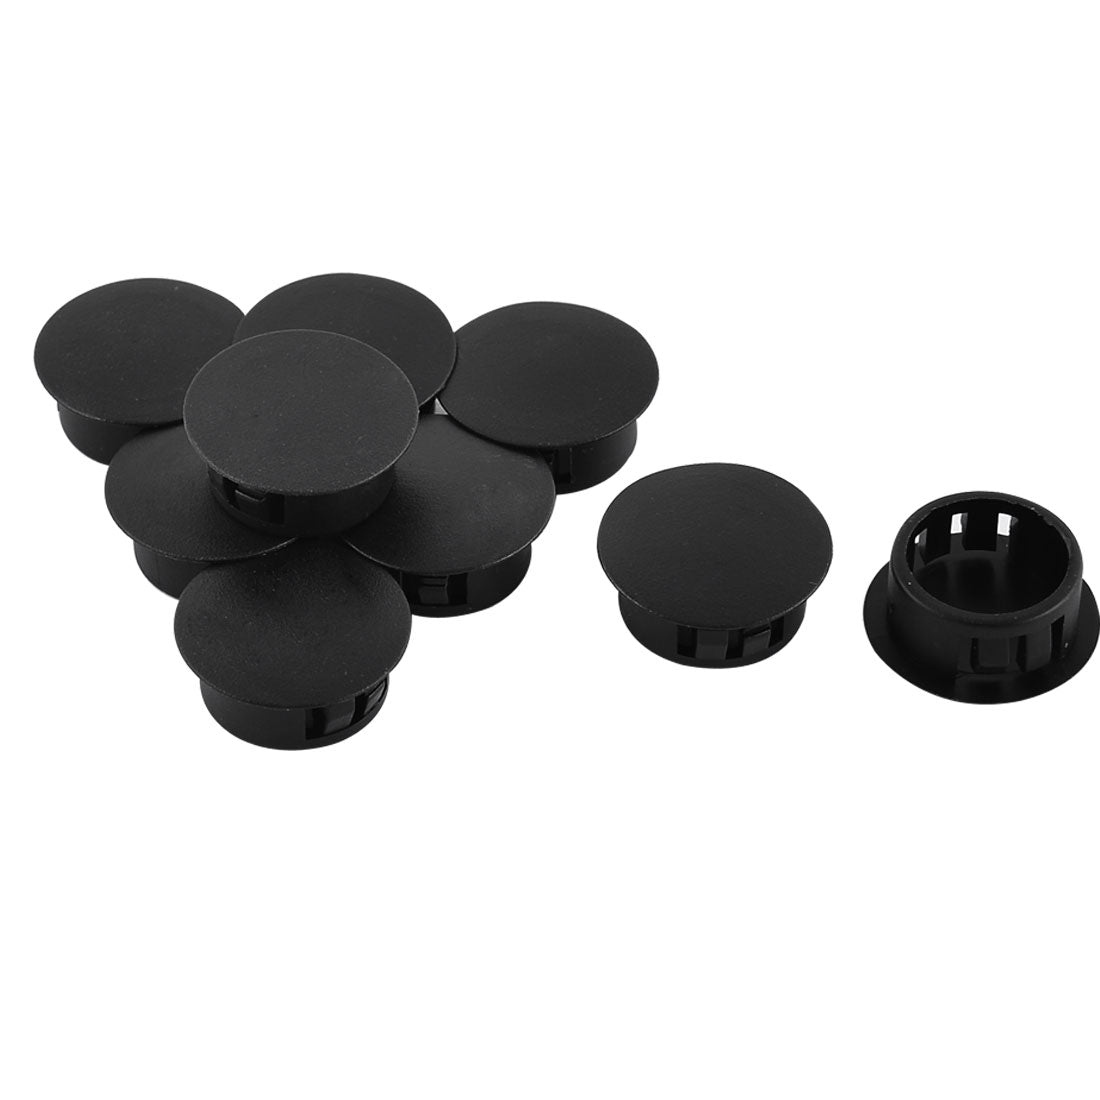 uxcell Uxcell Plastic Round Shaped Mounting Locking Hole Plugs Button Cover 20mm Diameter 8pcs